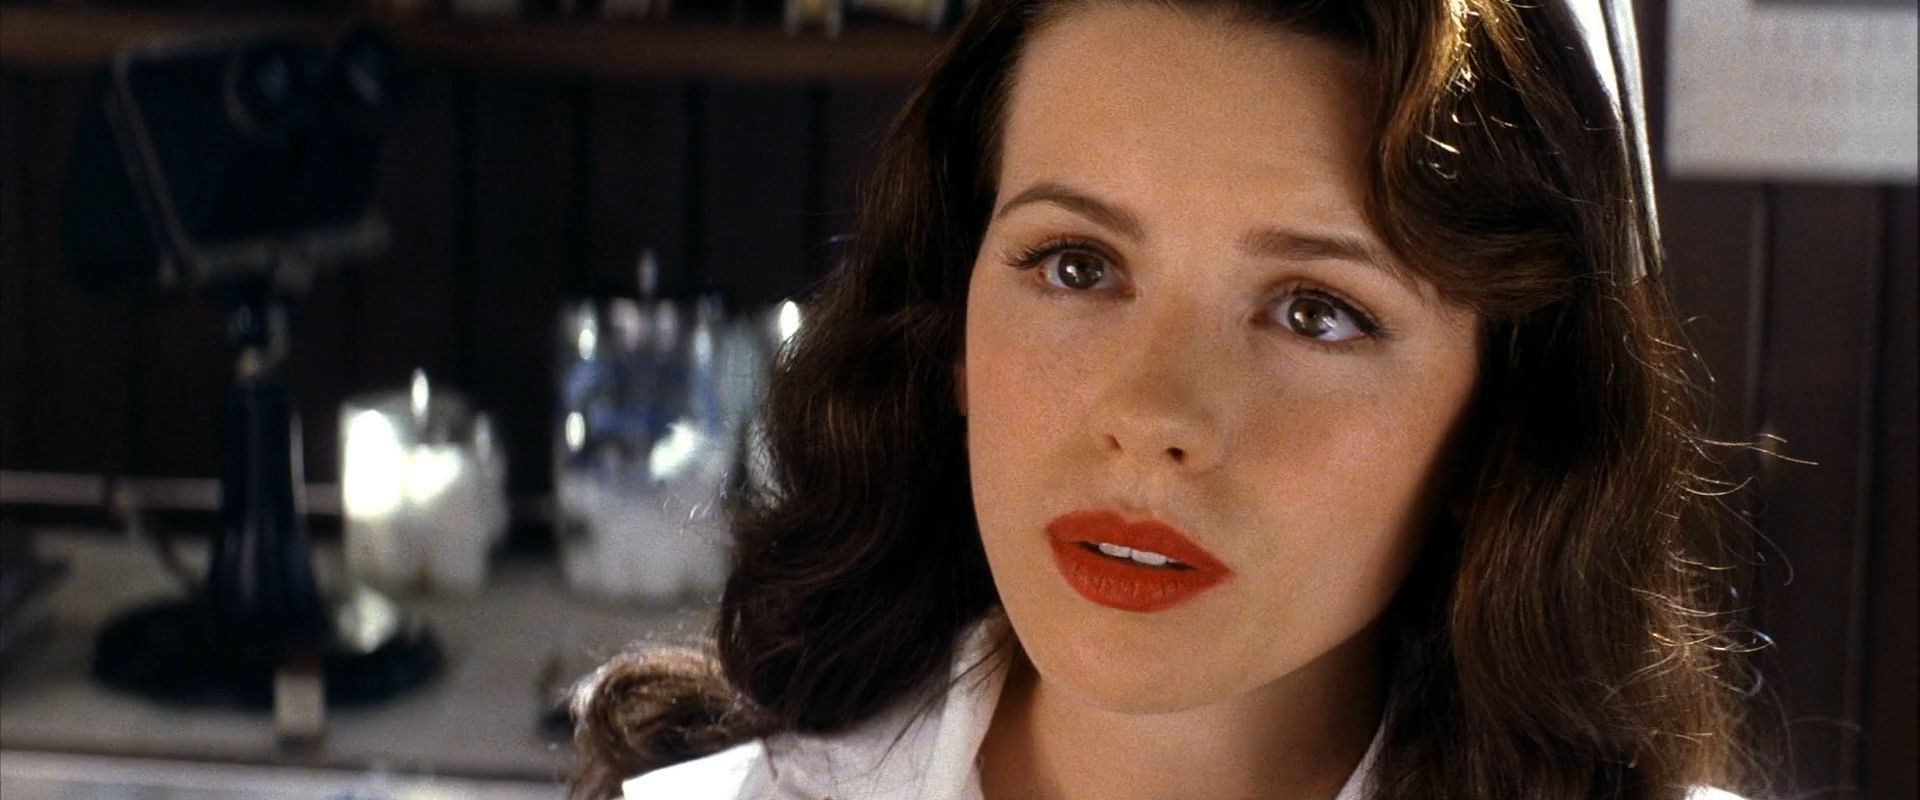 Image of Pearl Harbor (2001) for fans of Kate Beckinsale. 